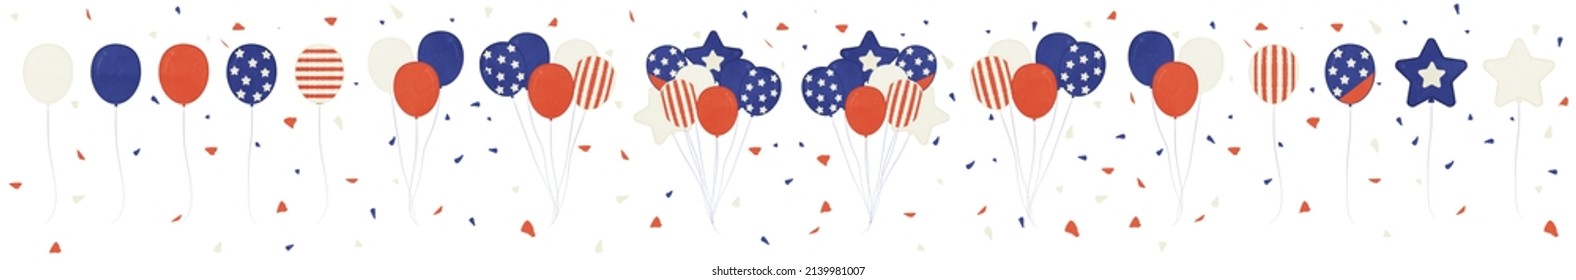 Cute balloons with American flag pattern